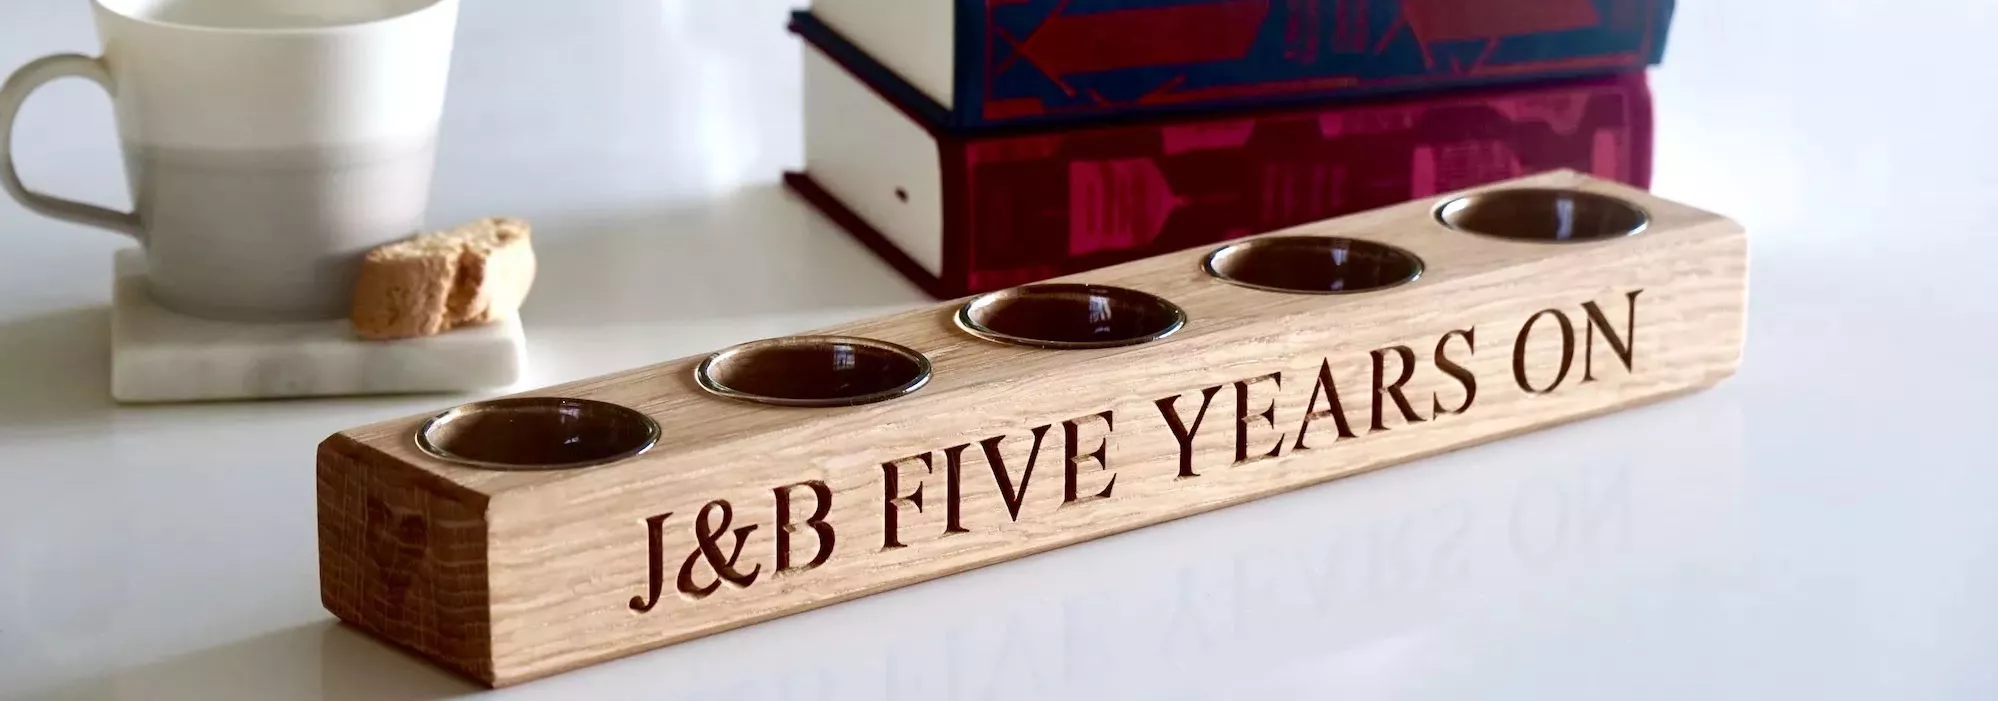 5 year anniversary gift traditional and modern – TogetherV Blog